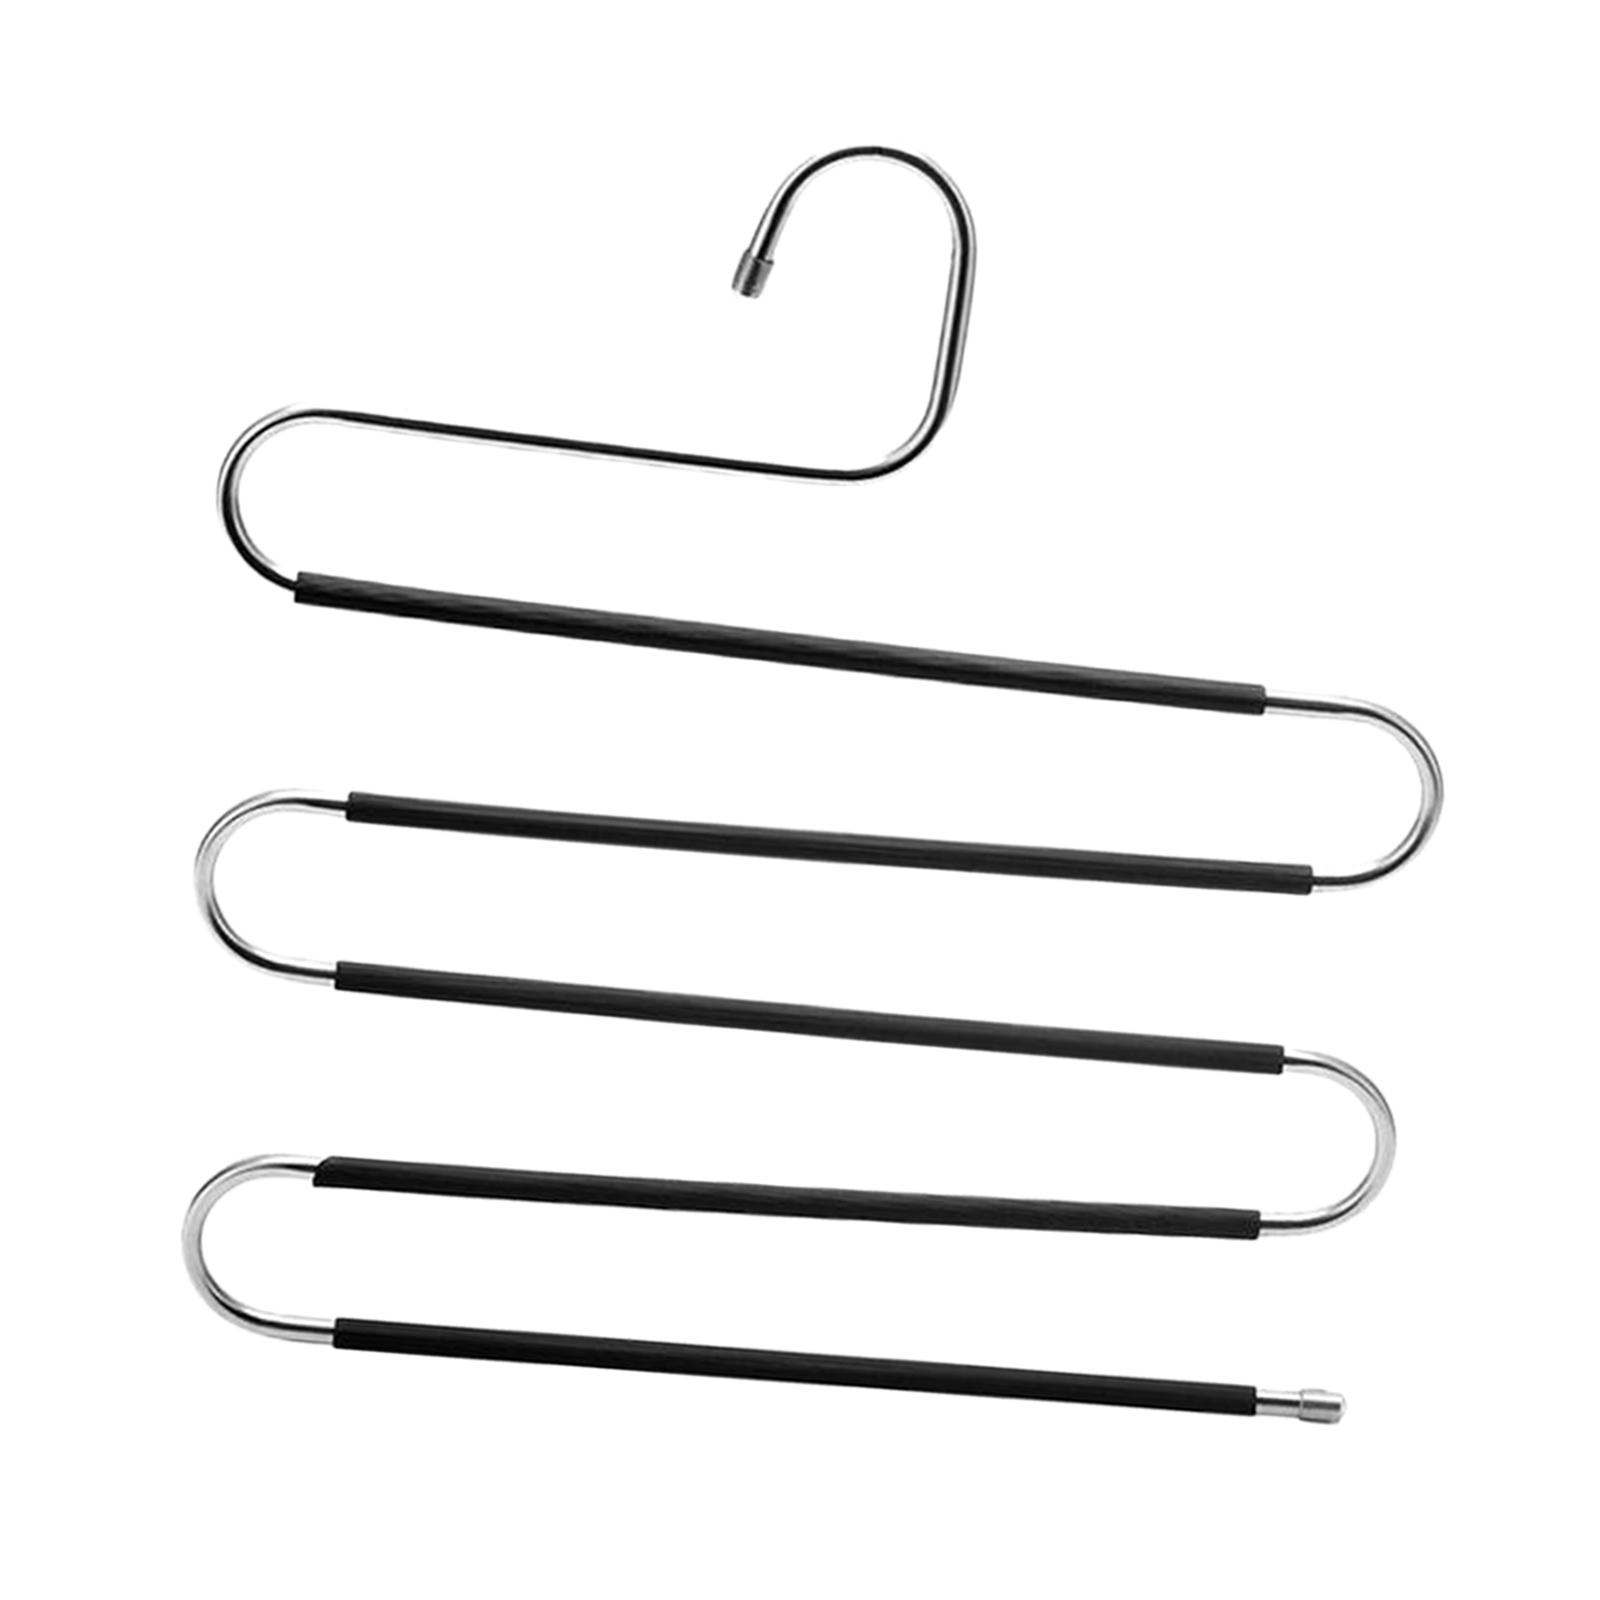 S-Type Stainless Steel Cabinet Clothes Pants Hangers Closet Storage Organizer for Pants